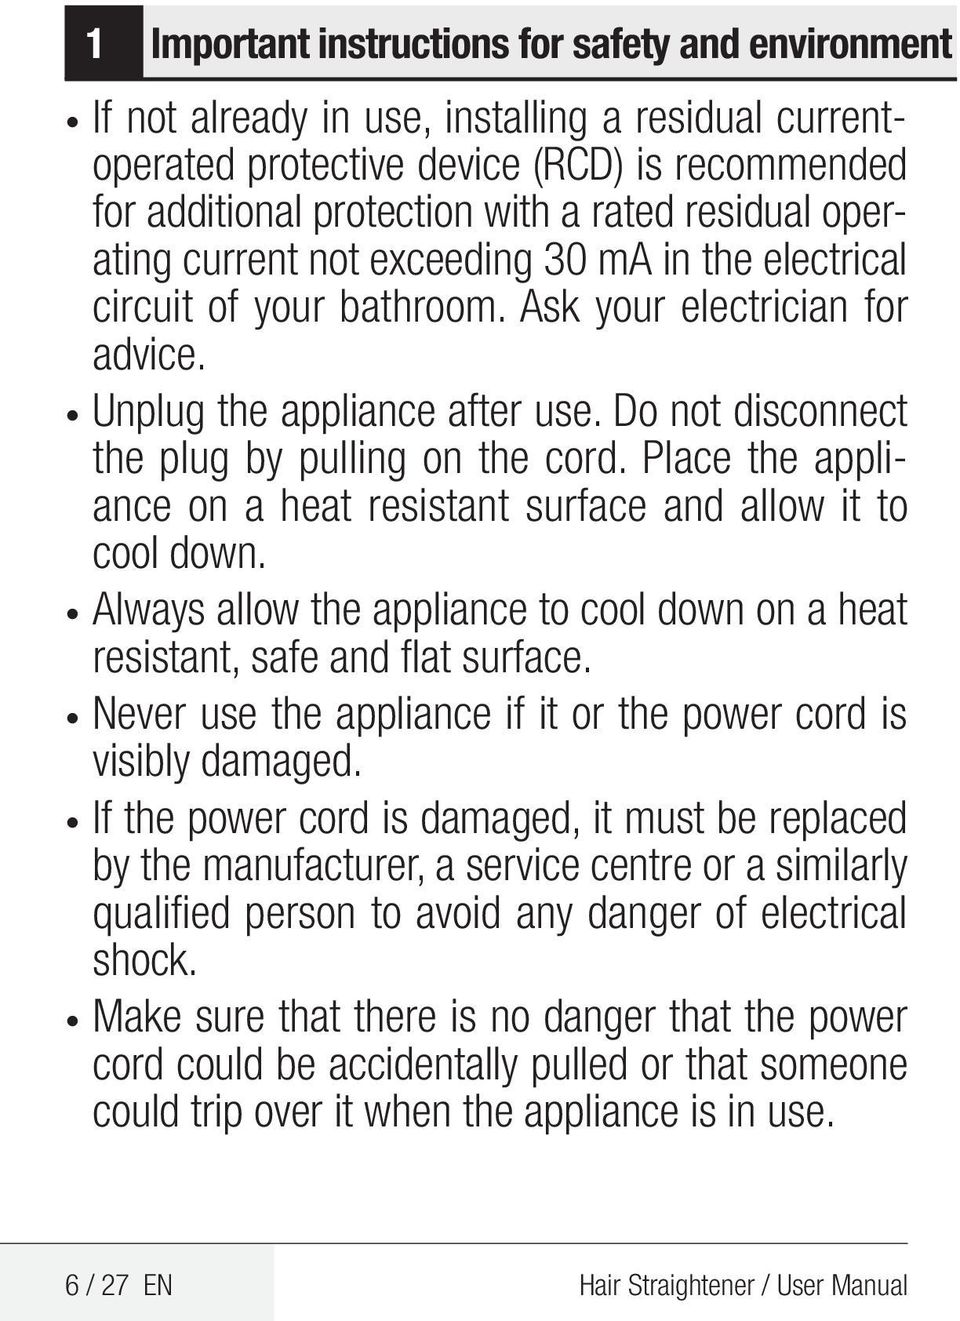 Place the appliance on a heat resistant surface and allow it to cool down. Always allow the appliance to cool down on a heat resistant, safe and flat surface.